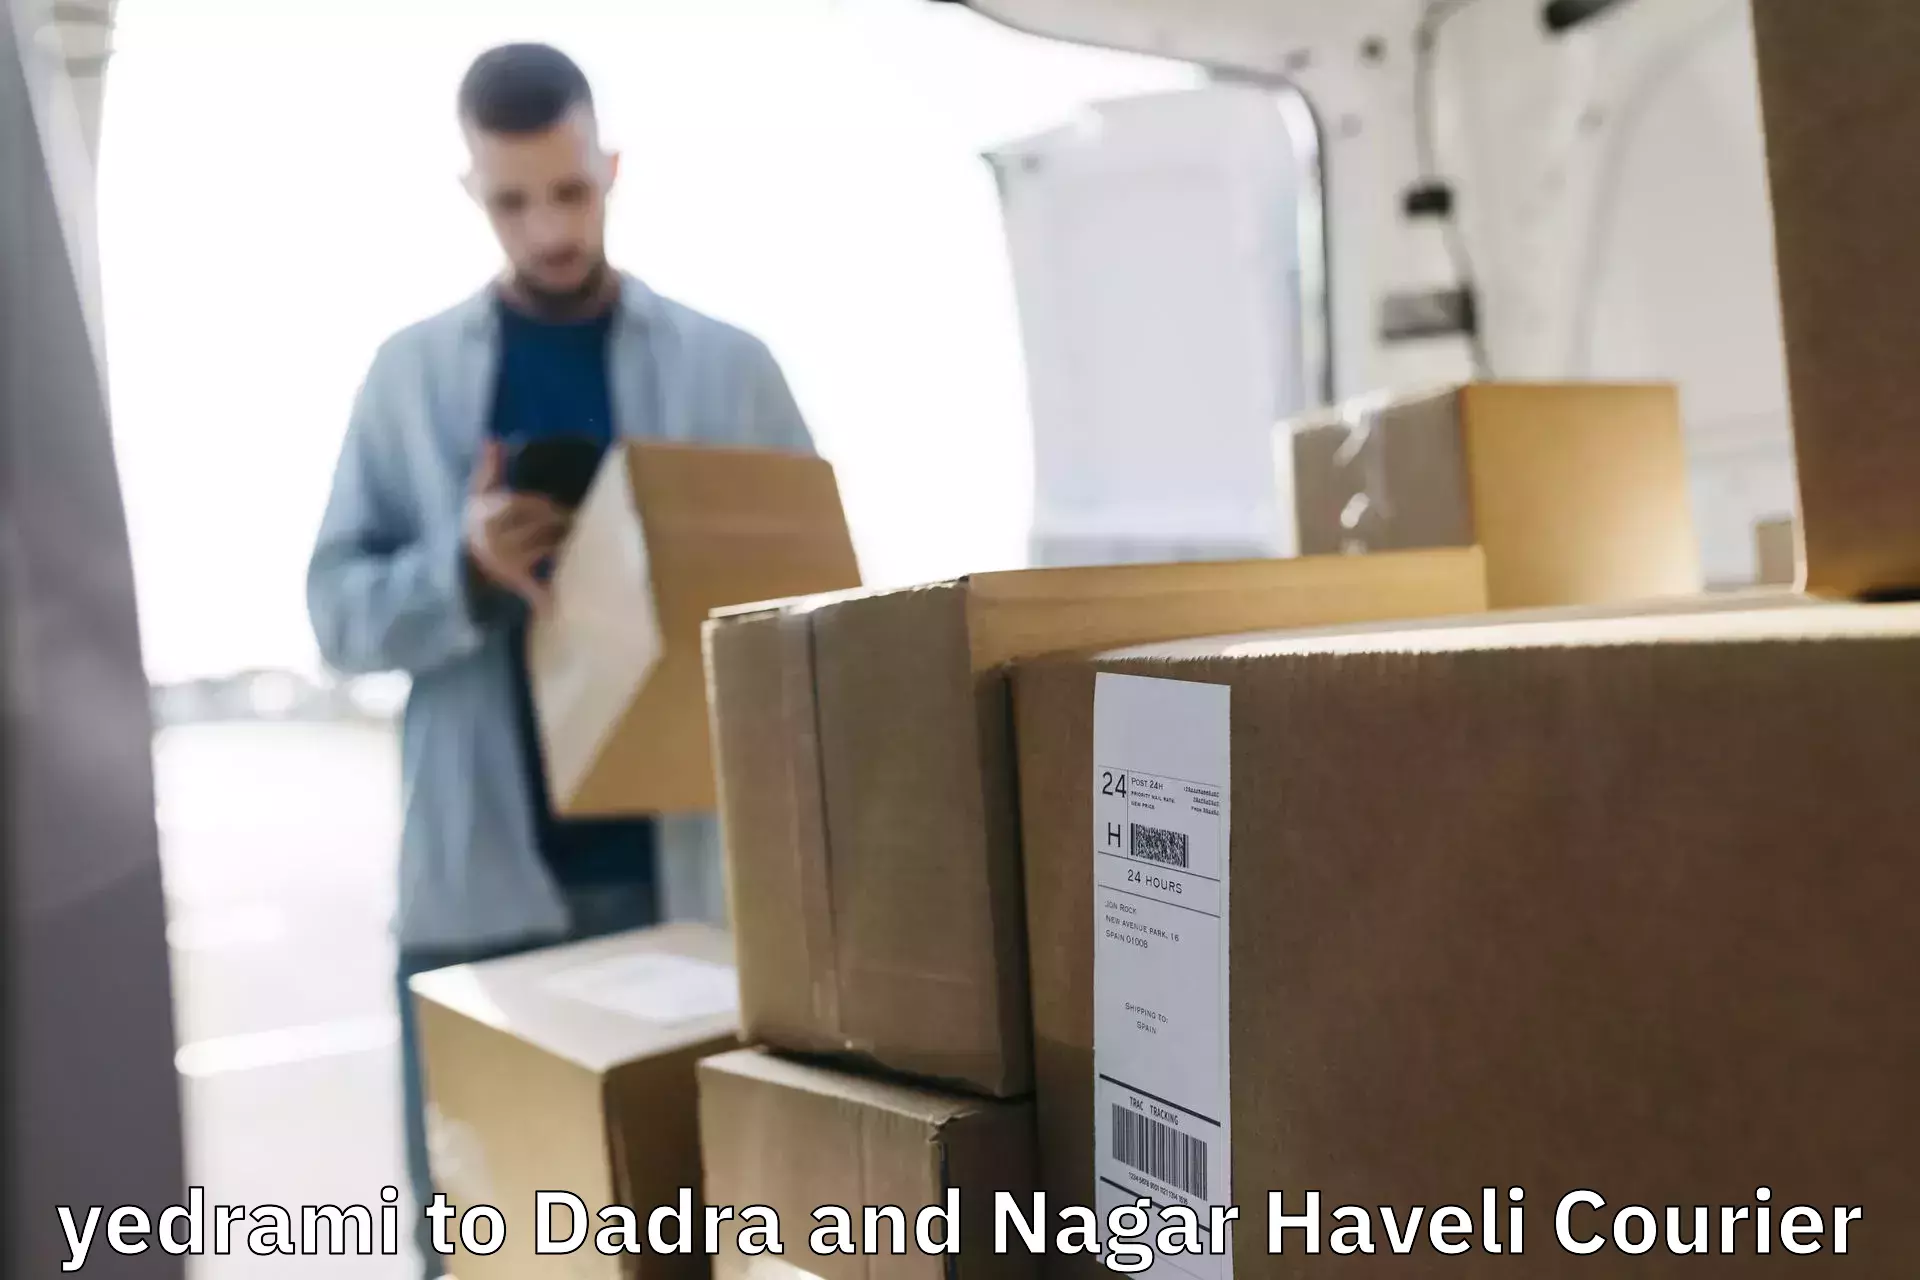 Quick courier services yedrami to Dadra and Nagar Haveli